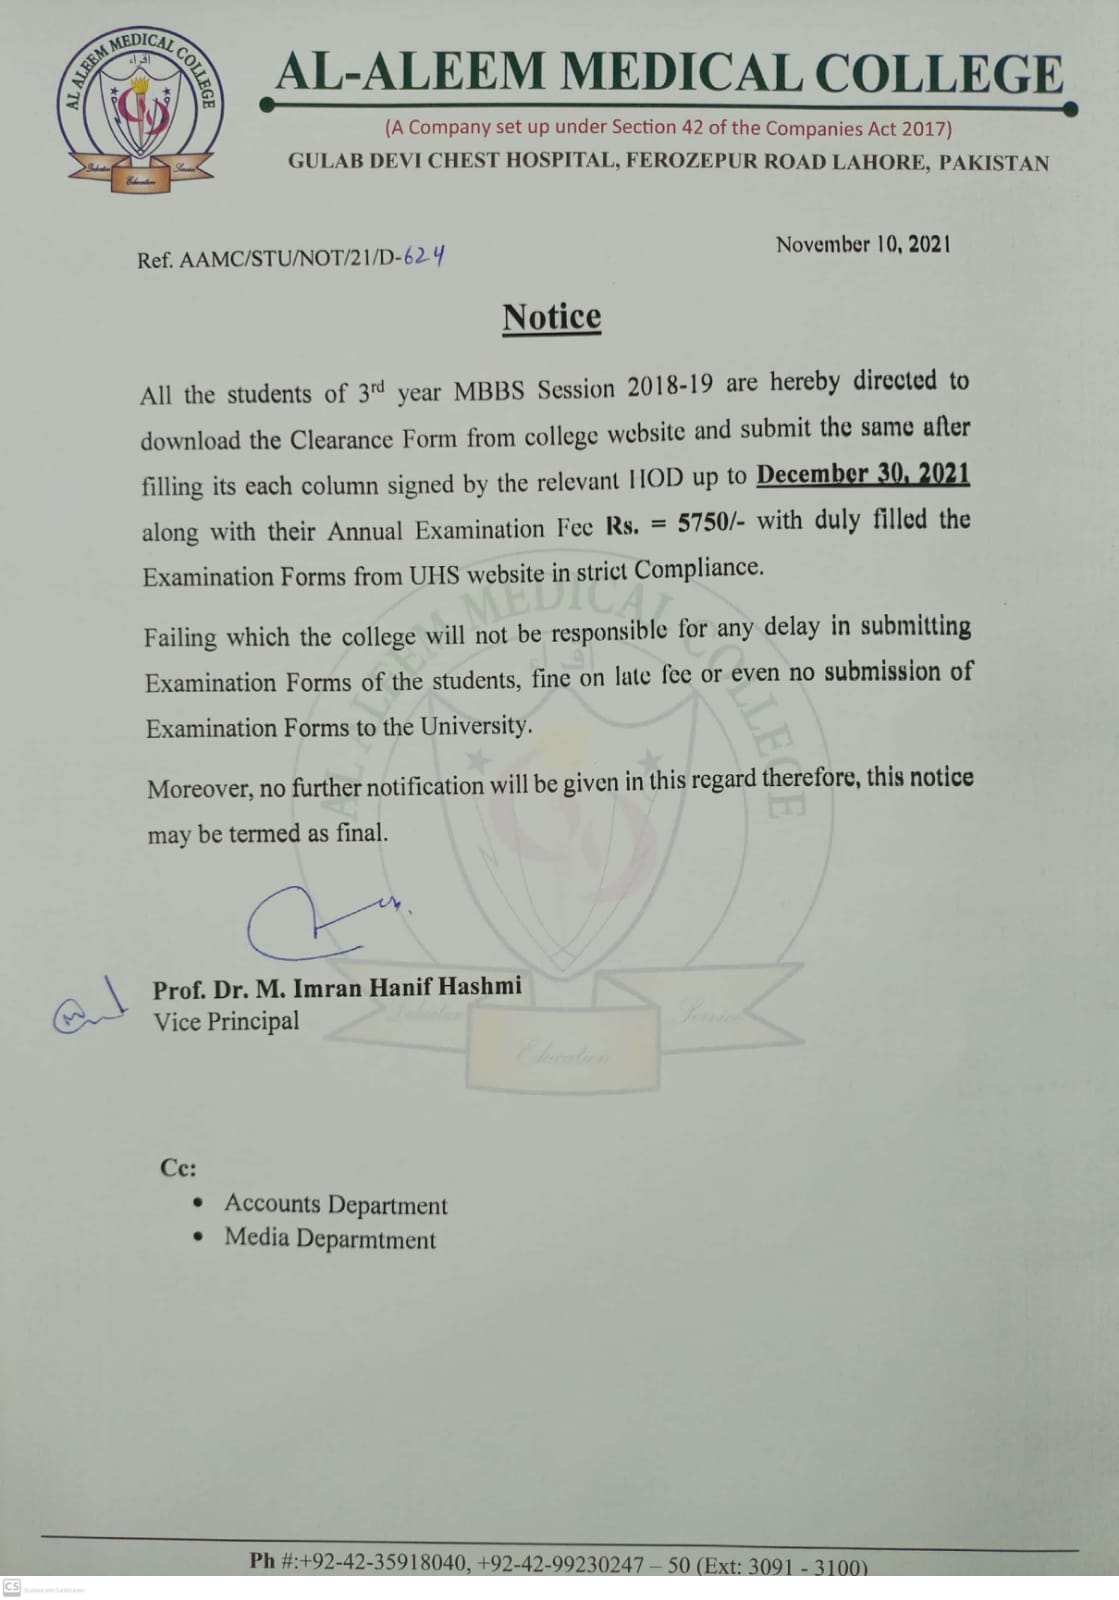 Clearance Form & Examination Fee Session 2018-19